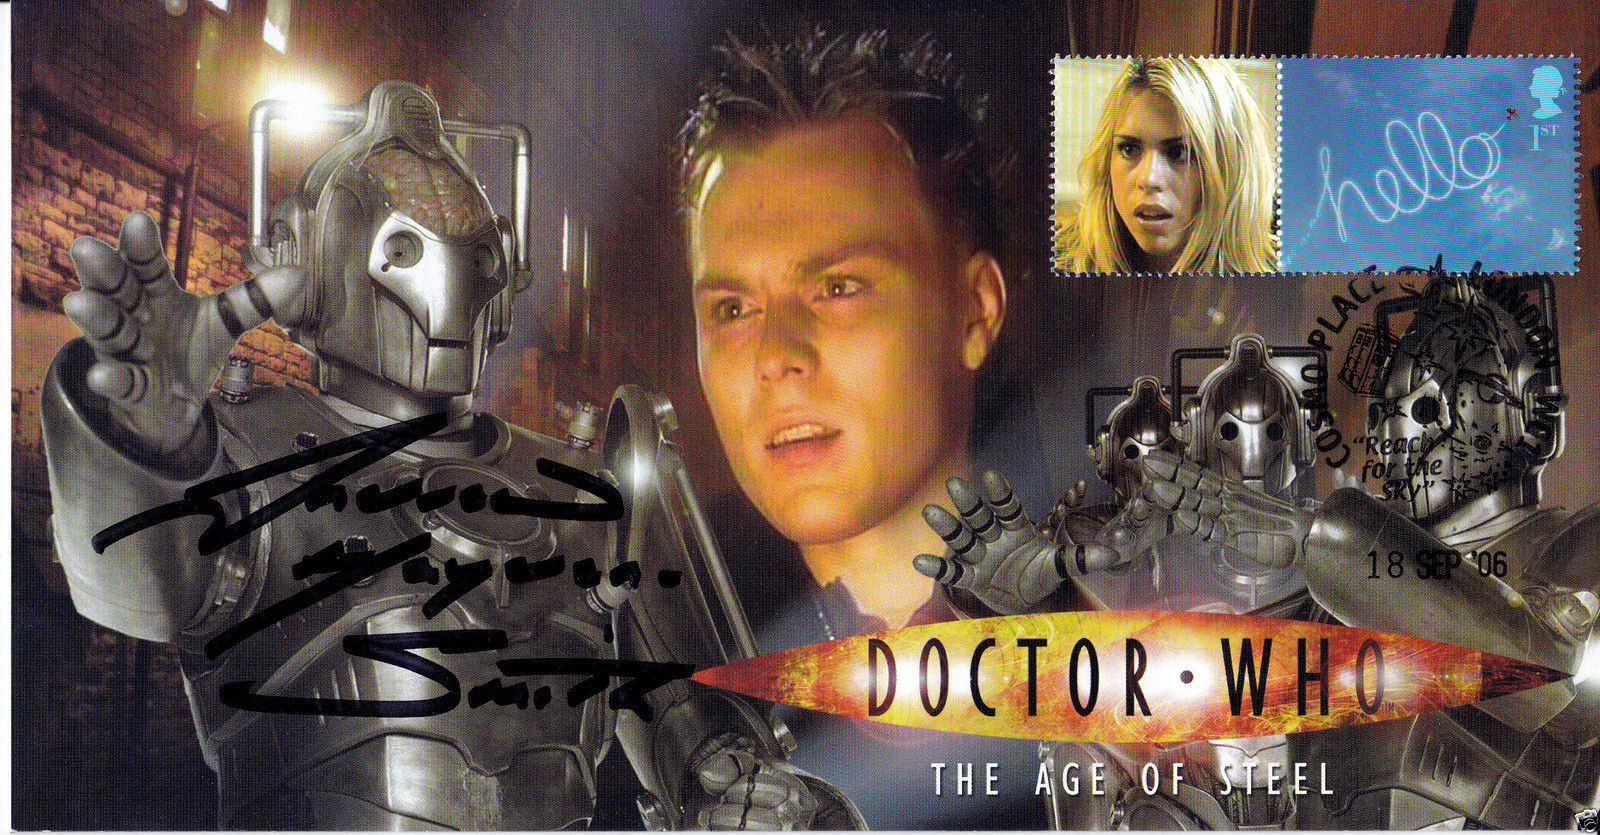 Doctor Who 2006 Series 2 Episode 6 Age of Steel Collectible Stamp Cover Signed by ANDREW HAYDEN SMITH